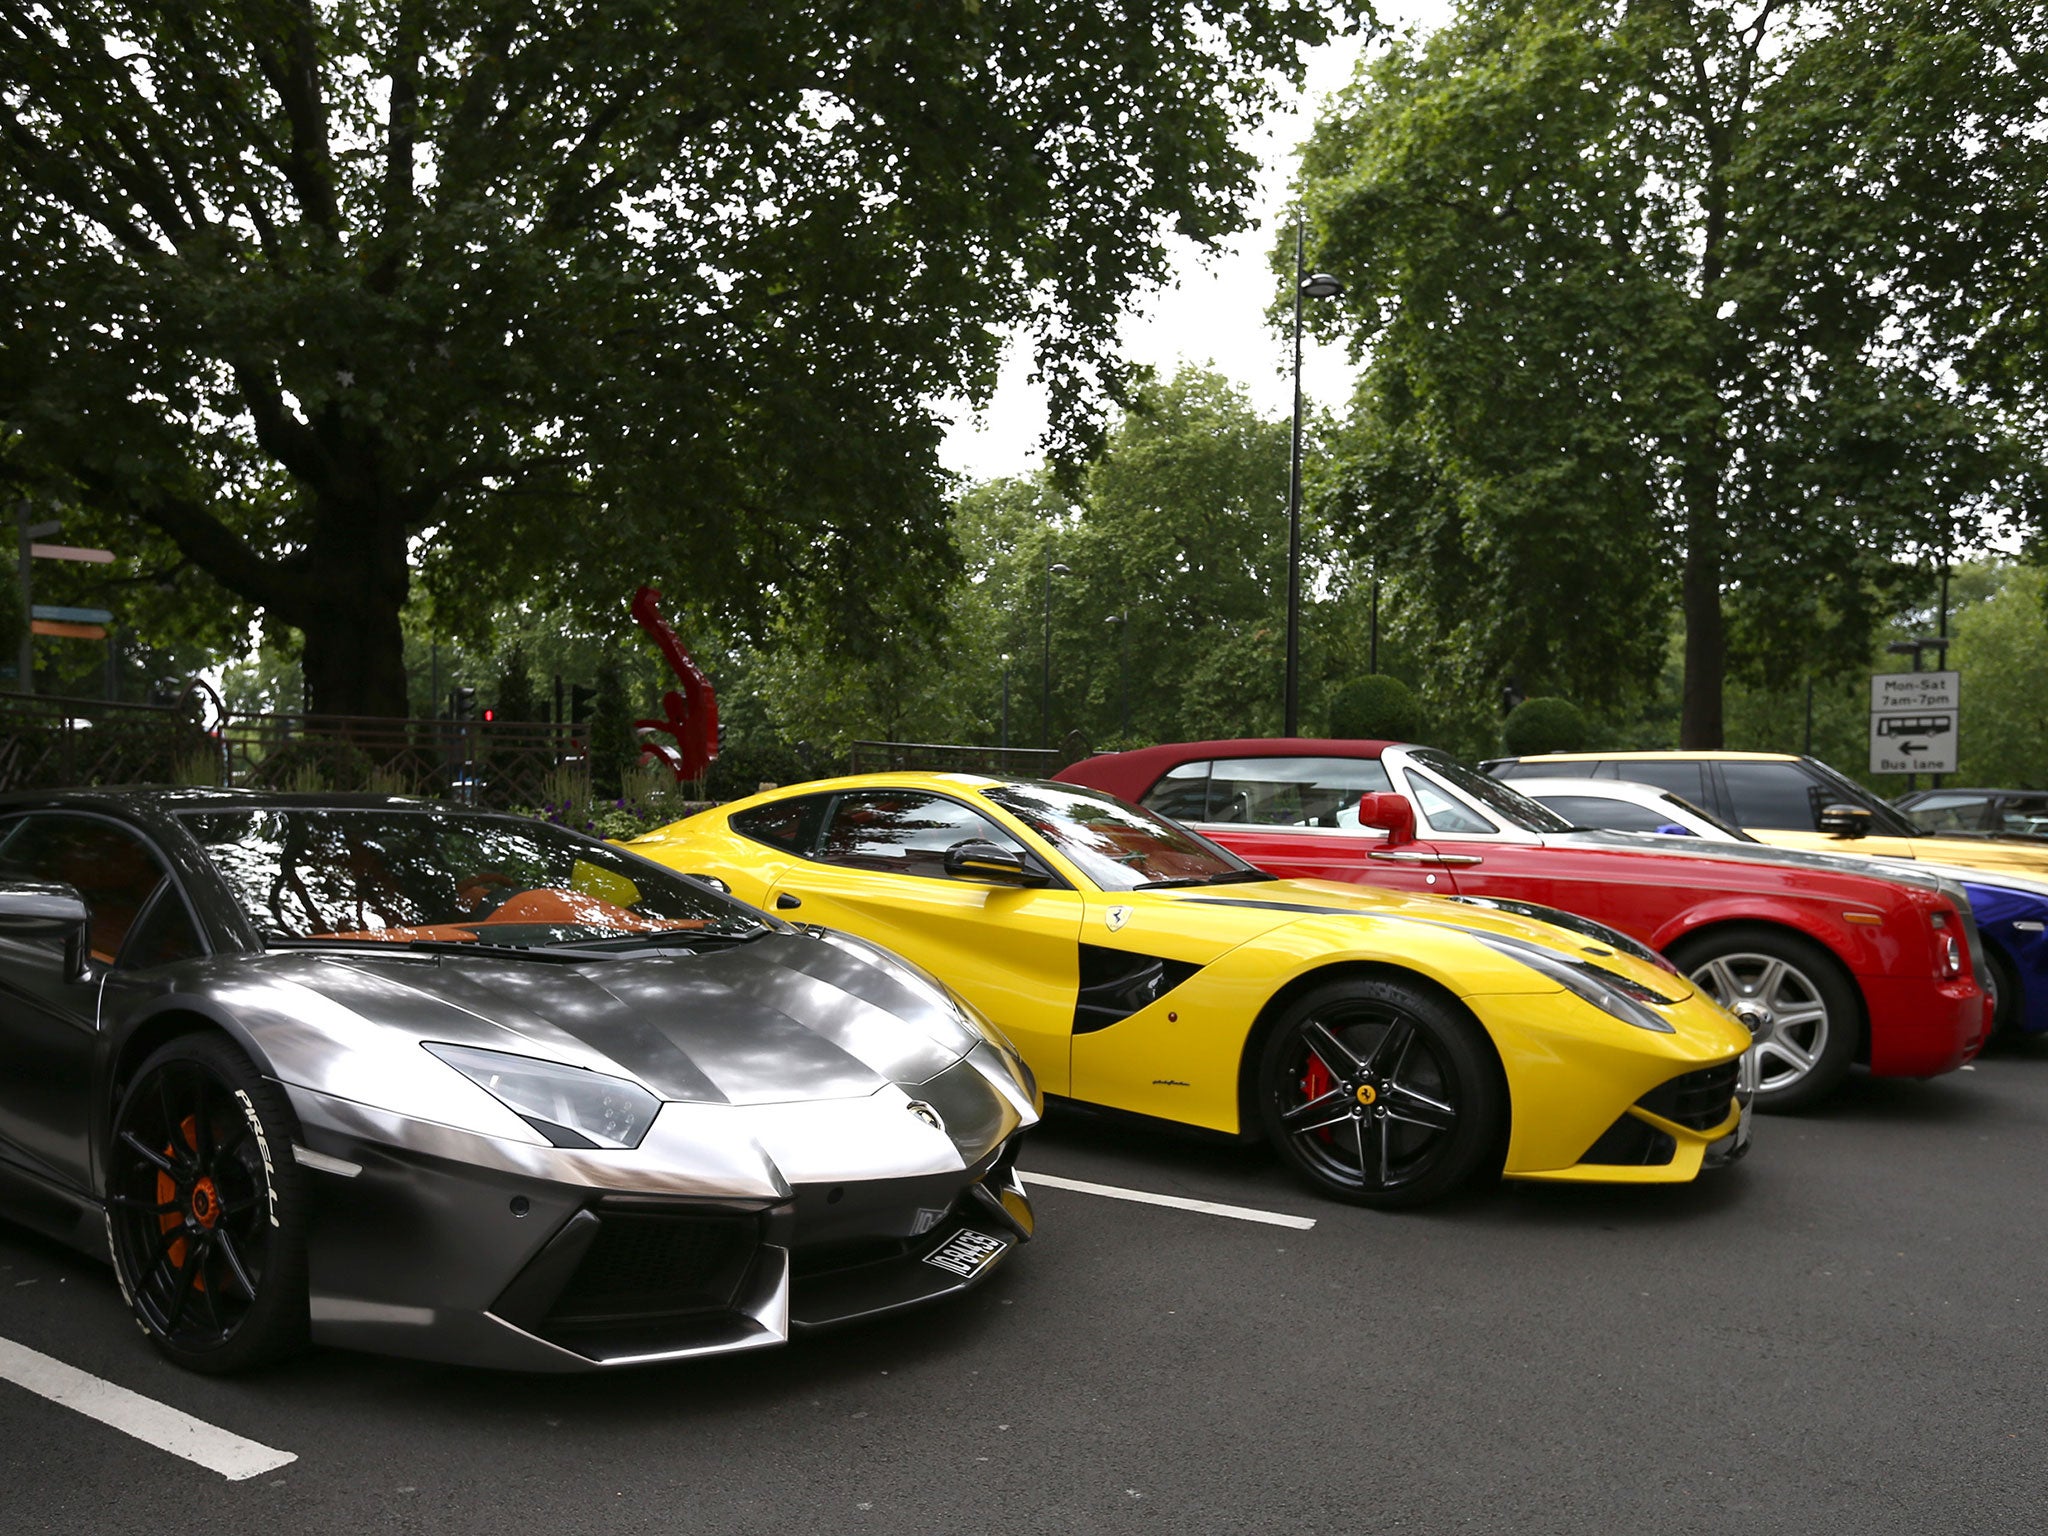 Drivers of supercars in Knightsbridge may have to resist the urge to rev their engines or accelerate quickly